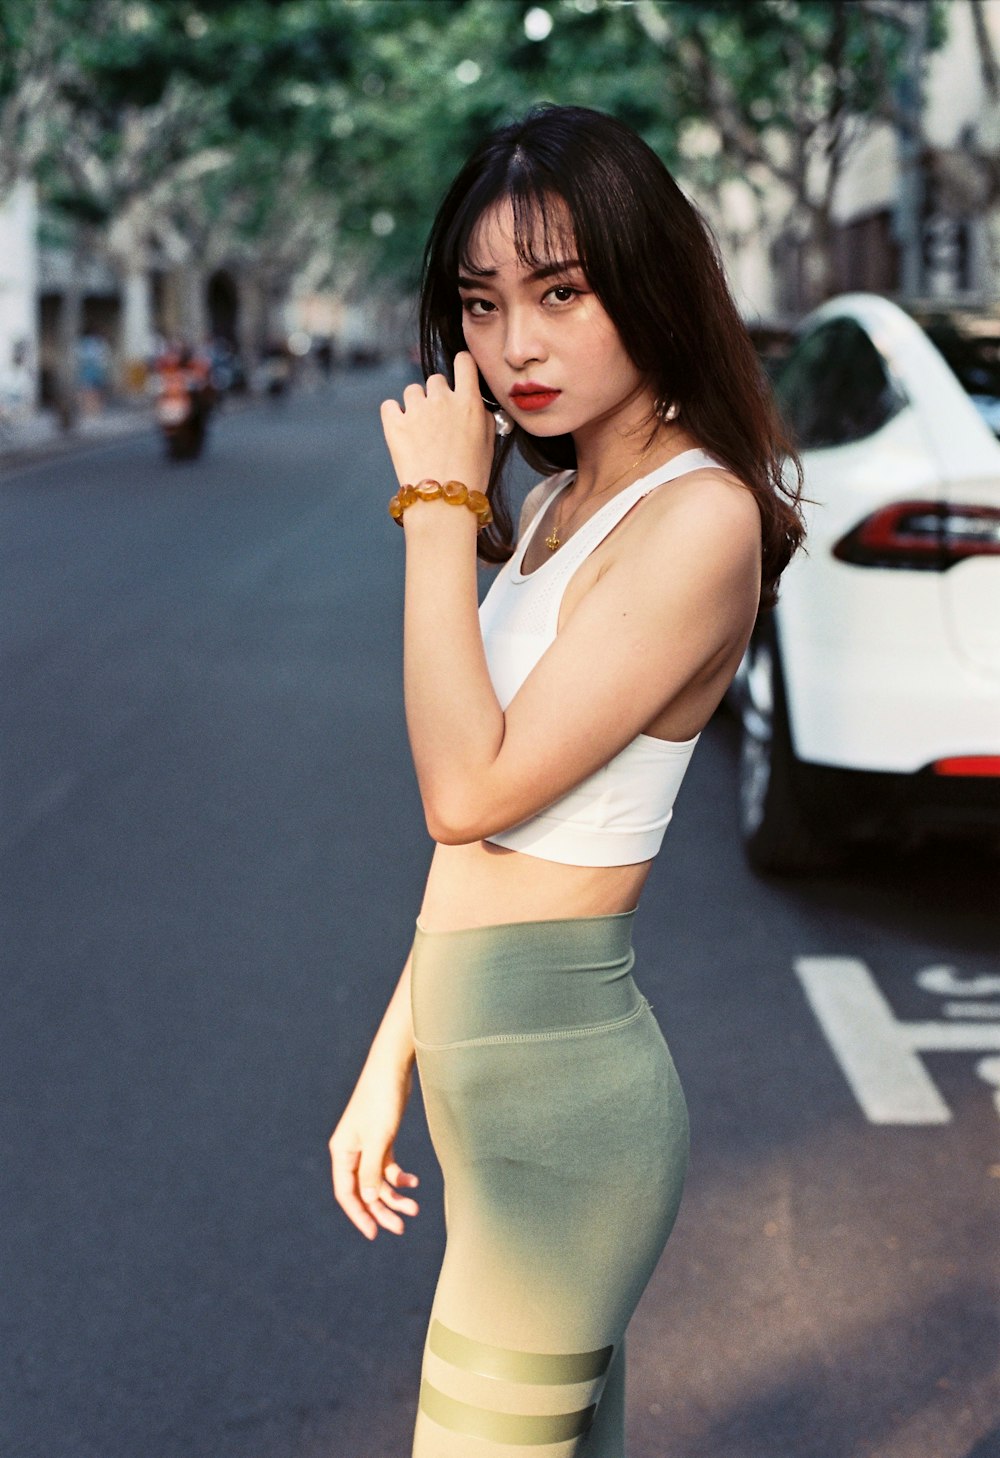 woman in white tank top and gray leggings standing on road during daytime